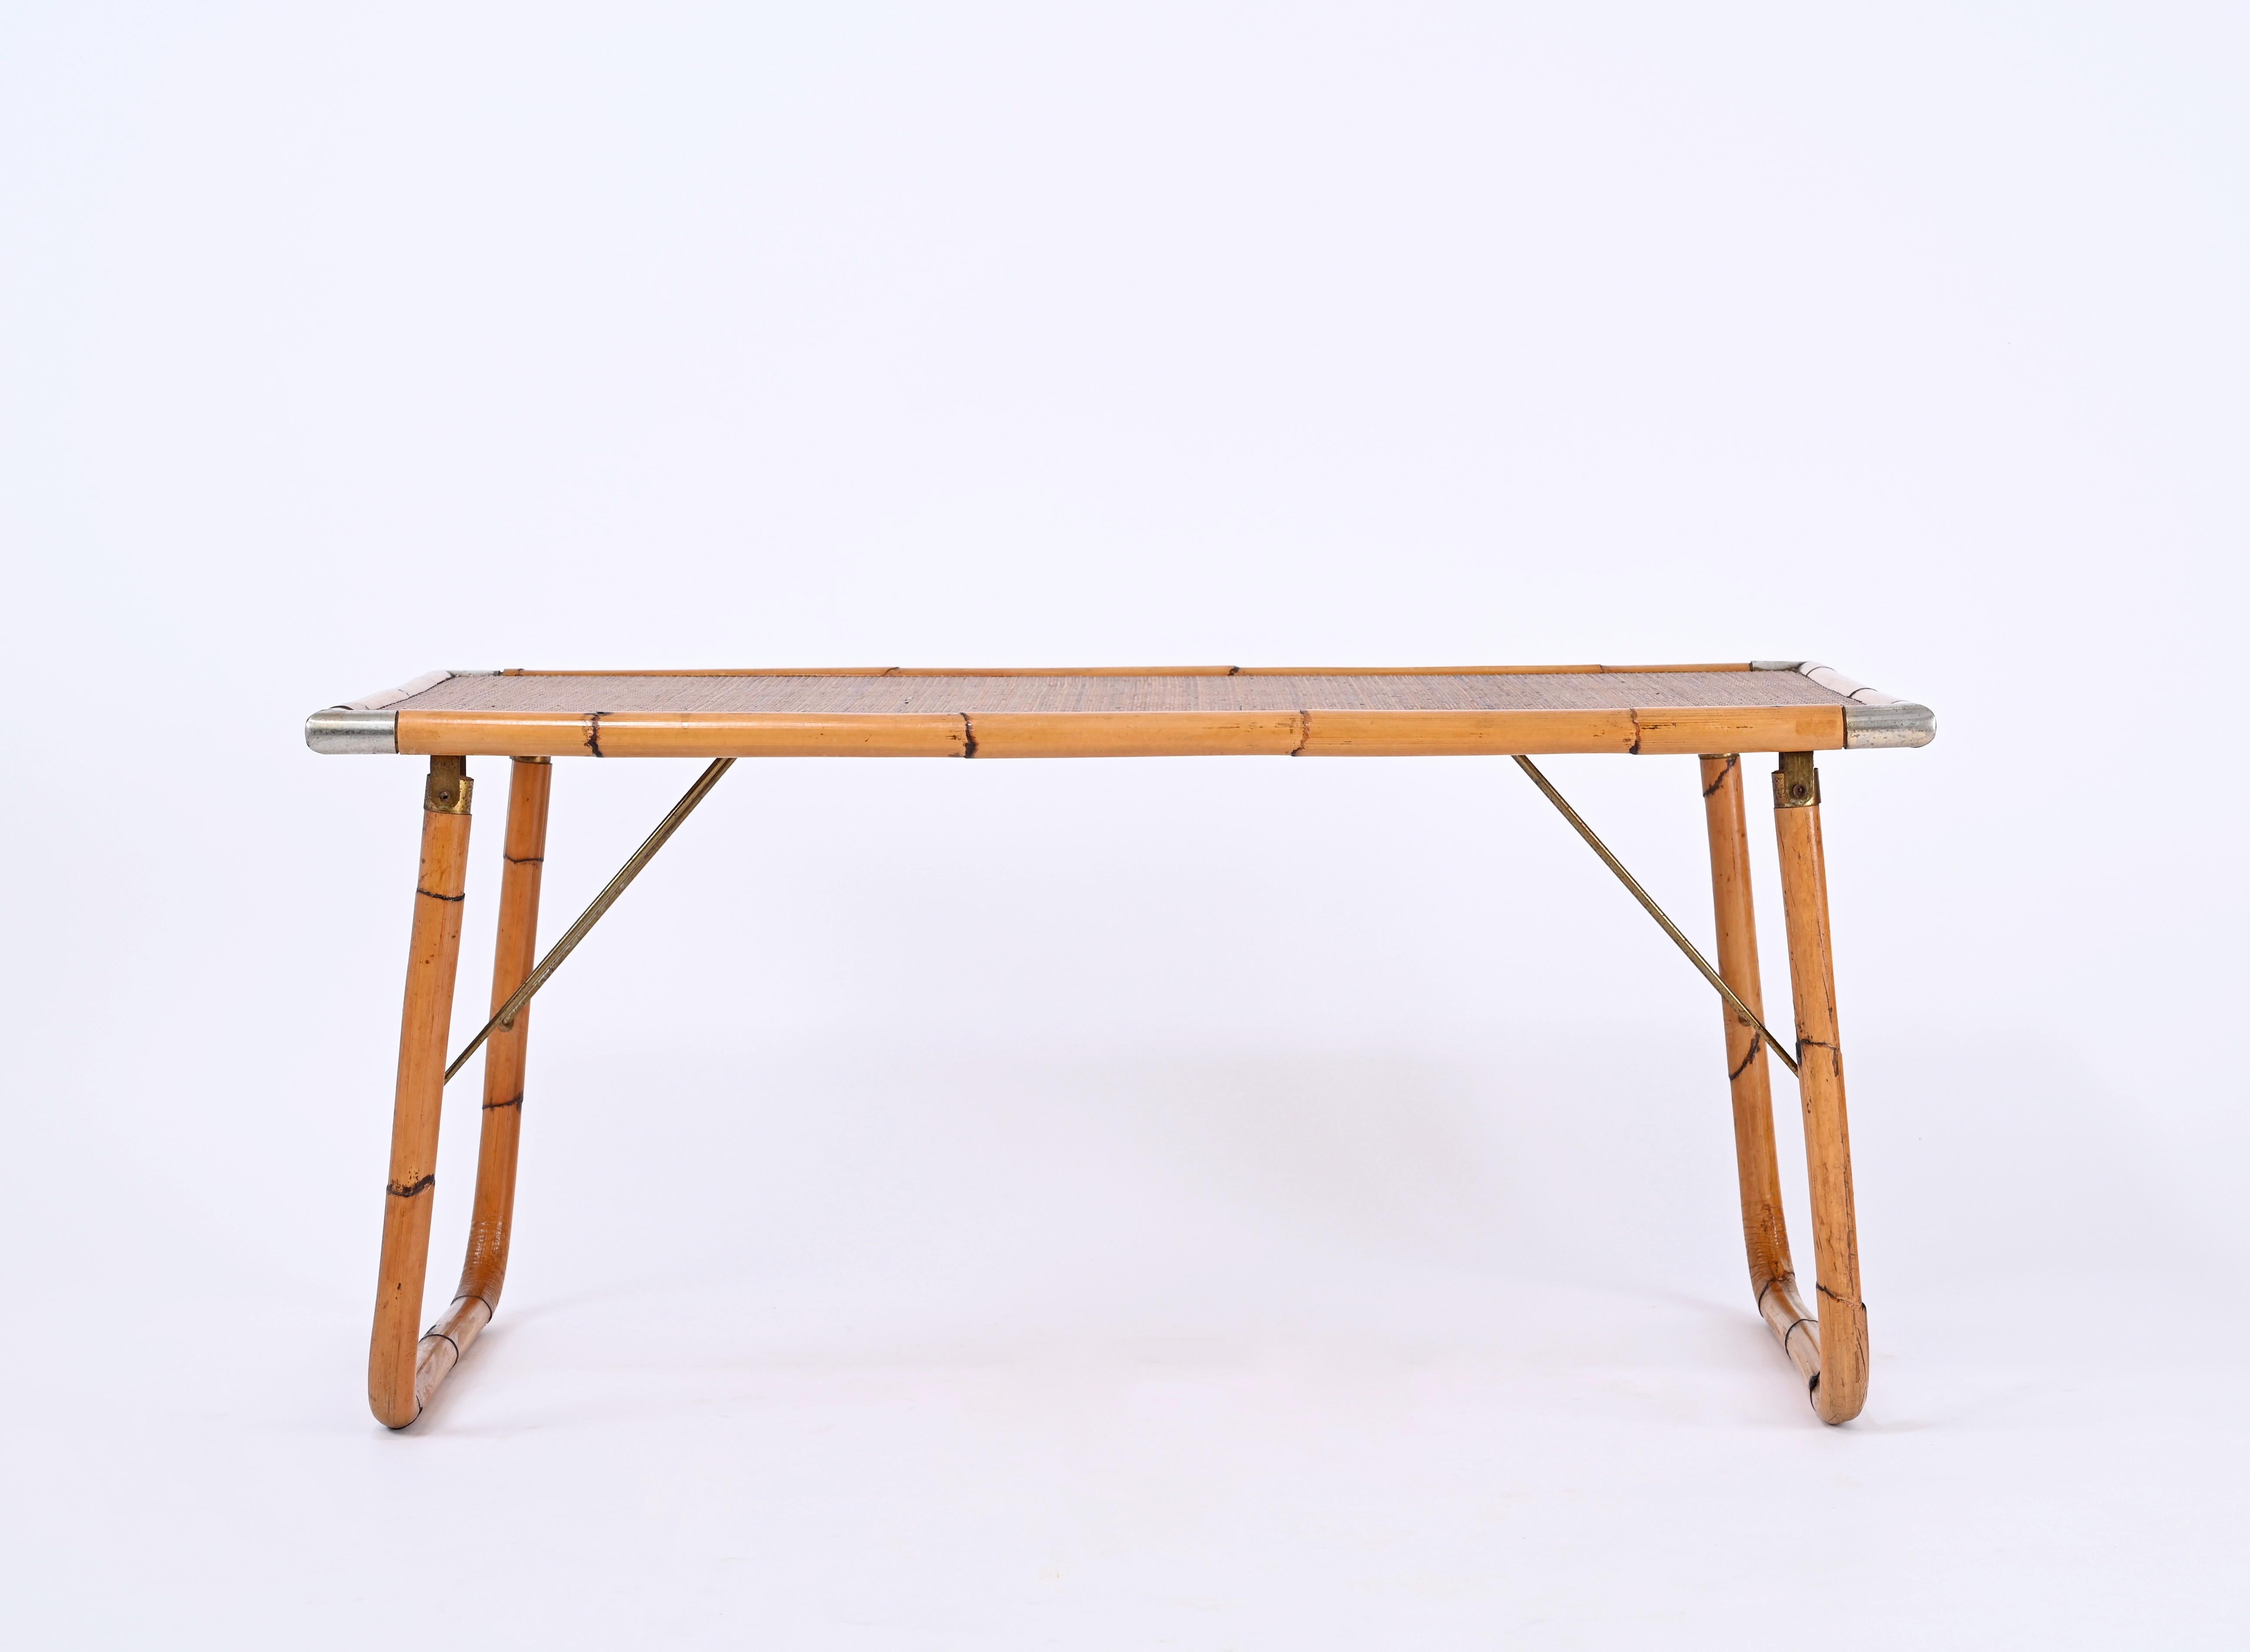 Hand-Crafted Midcentury Folding Coffee Table in Bamboo, Wicker and Metal, Italy 1960s